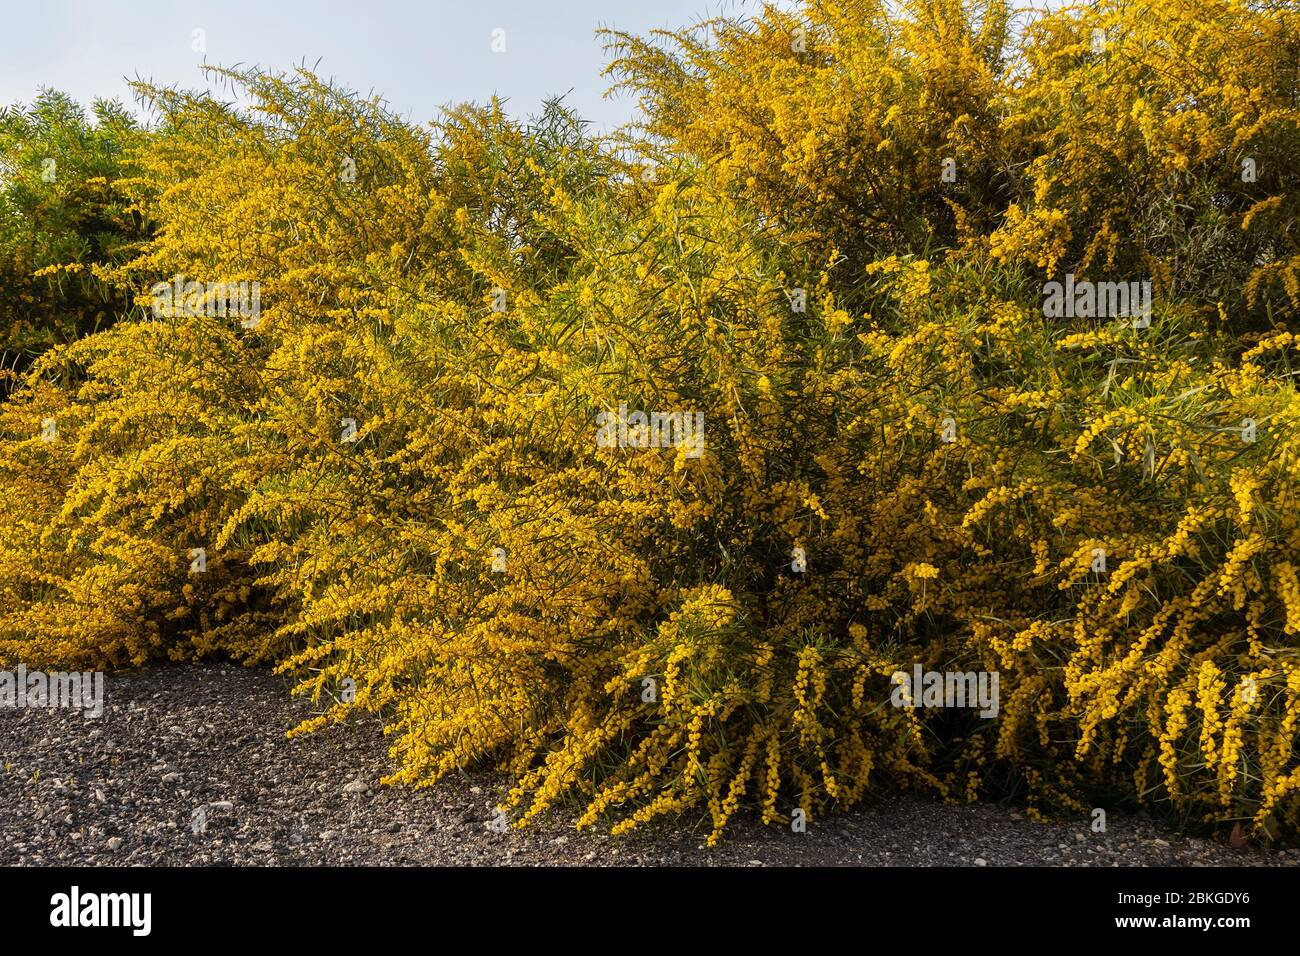 A big bush of Acacia Saligna on its blooming period with an abundance of yellow flowers Stock Photo